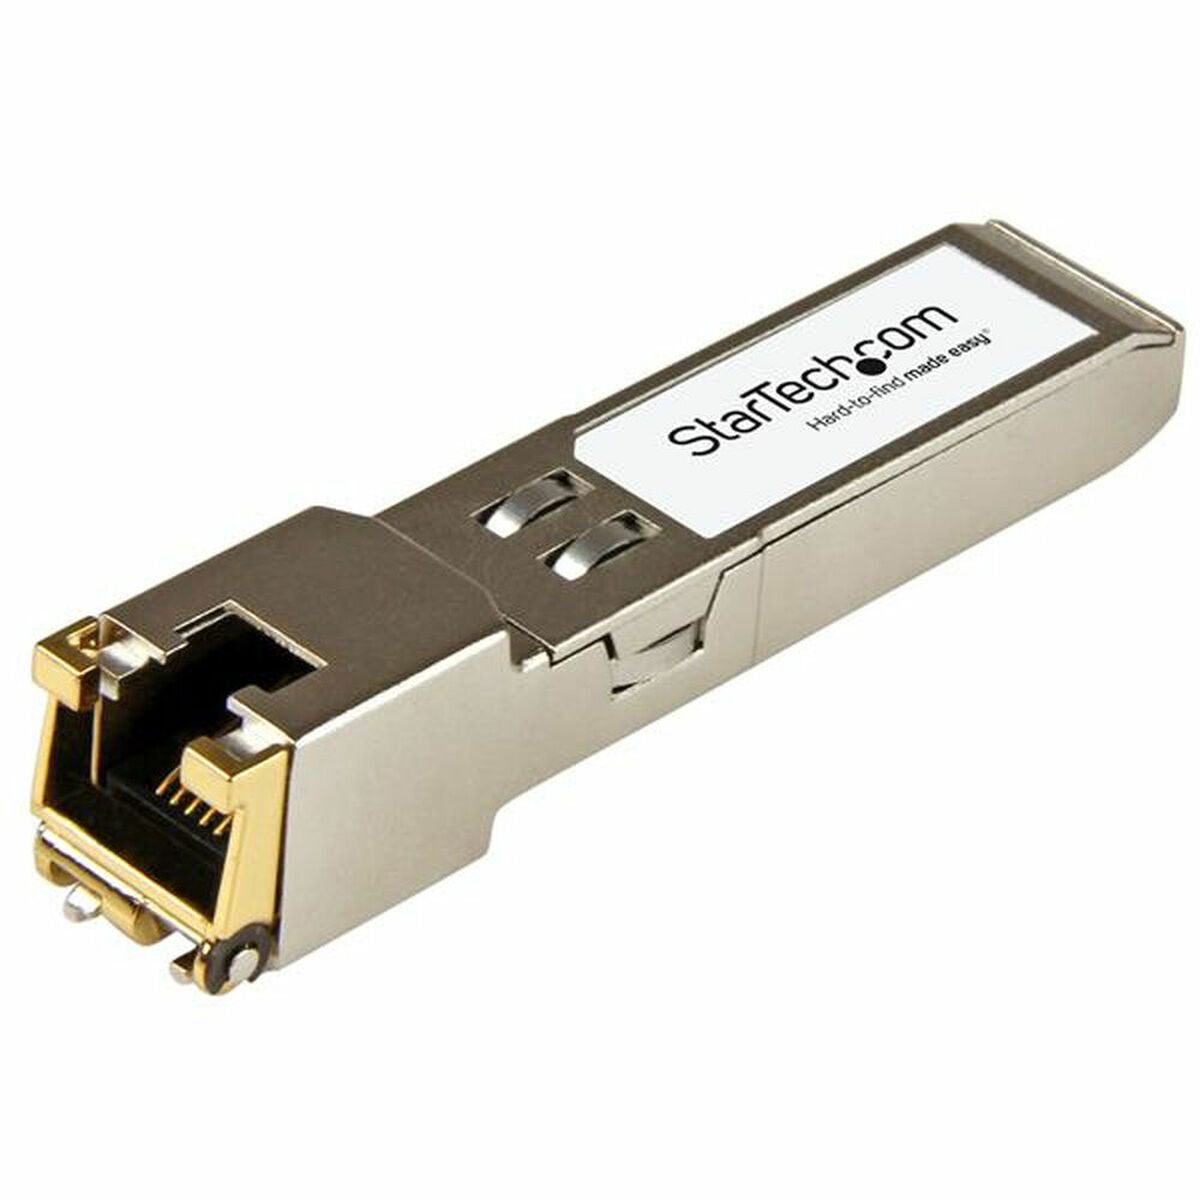 MultiMode SFP Fibre Module Startech 10050-ST, Startech, Computing, Network devices, multimode-sfp-fibre-module-startech-10050-st, Brand_Startech, category-reference-2609, category-reference-2803, category-reference-2821, category-reference-t-19685, category-reference-t-19914, category-reference-t-21374, Condition_NEW, networks/wiring, Price_50 - 100, Teleworking, RiotNook